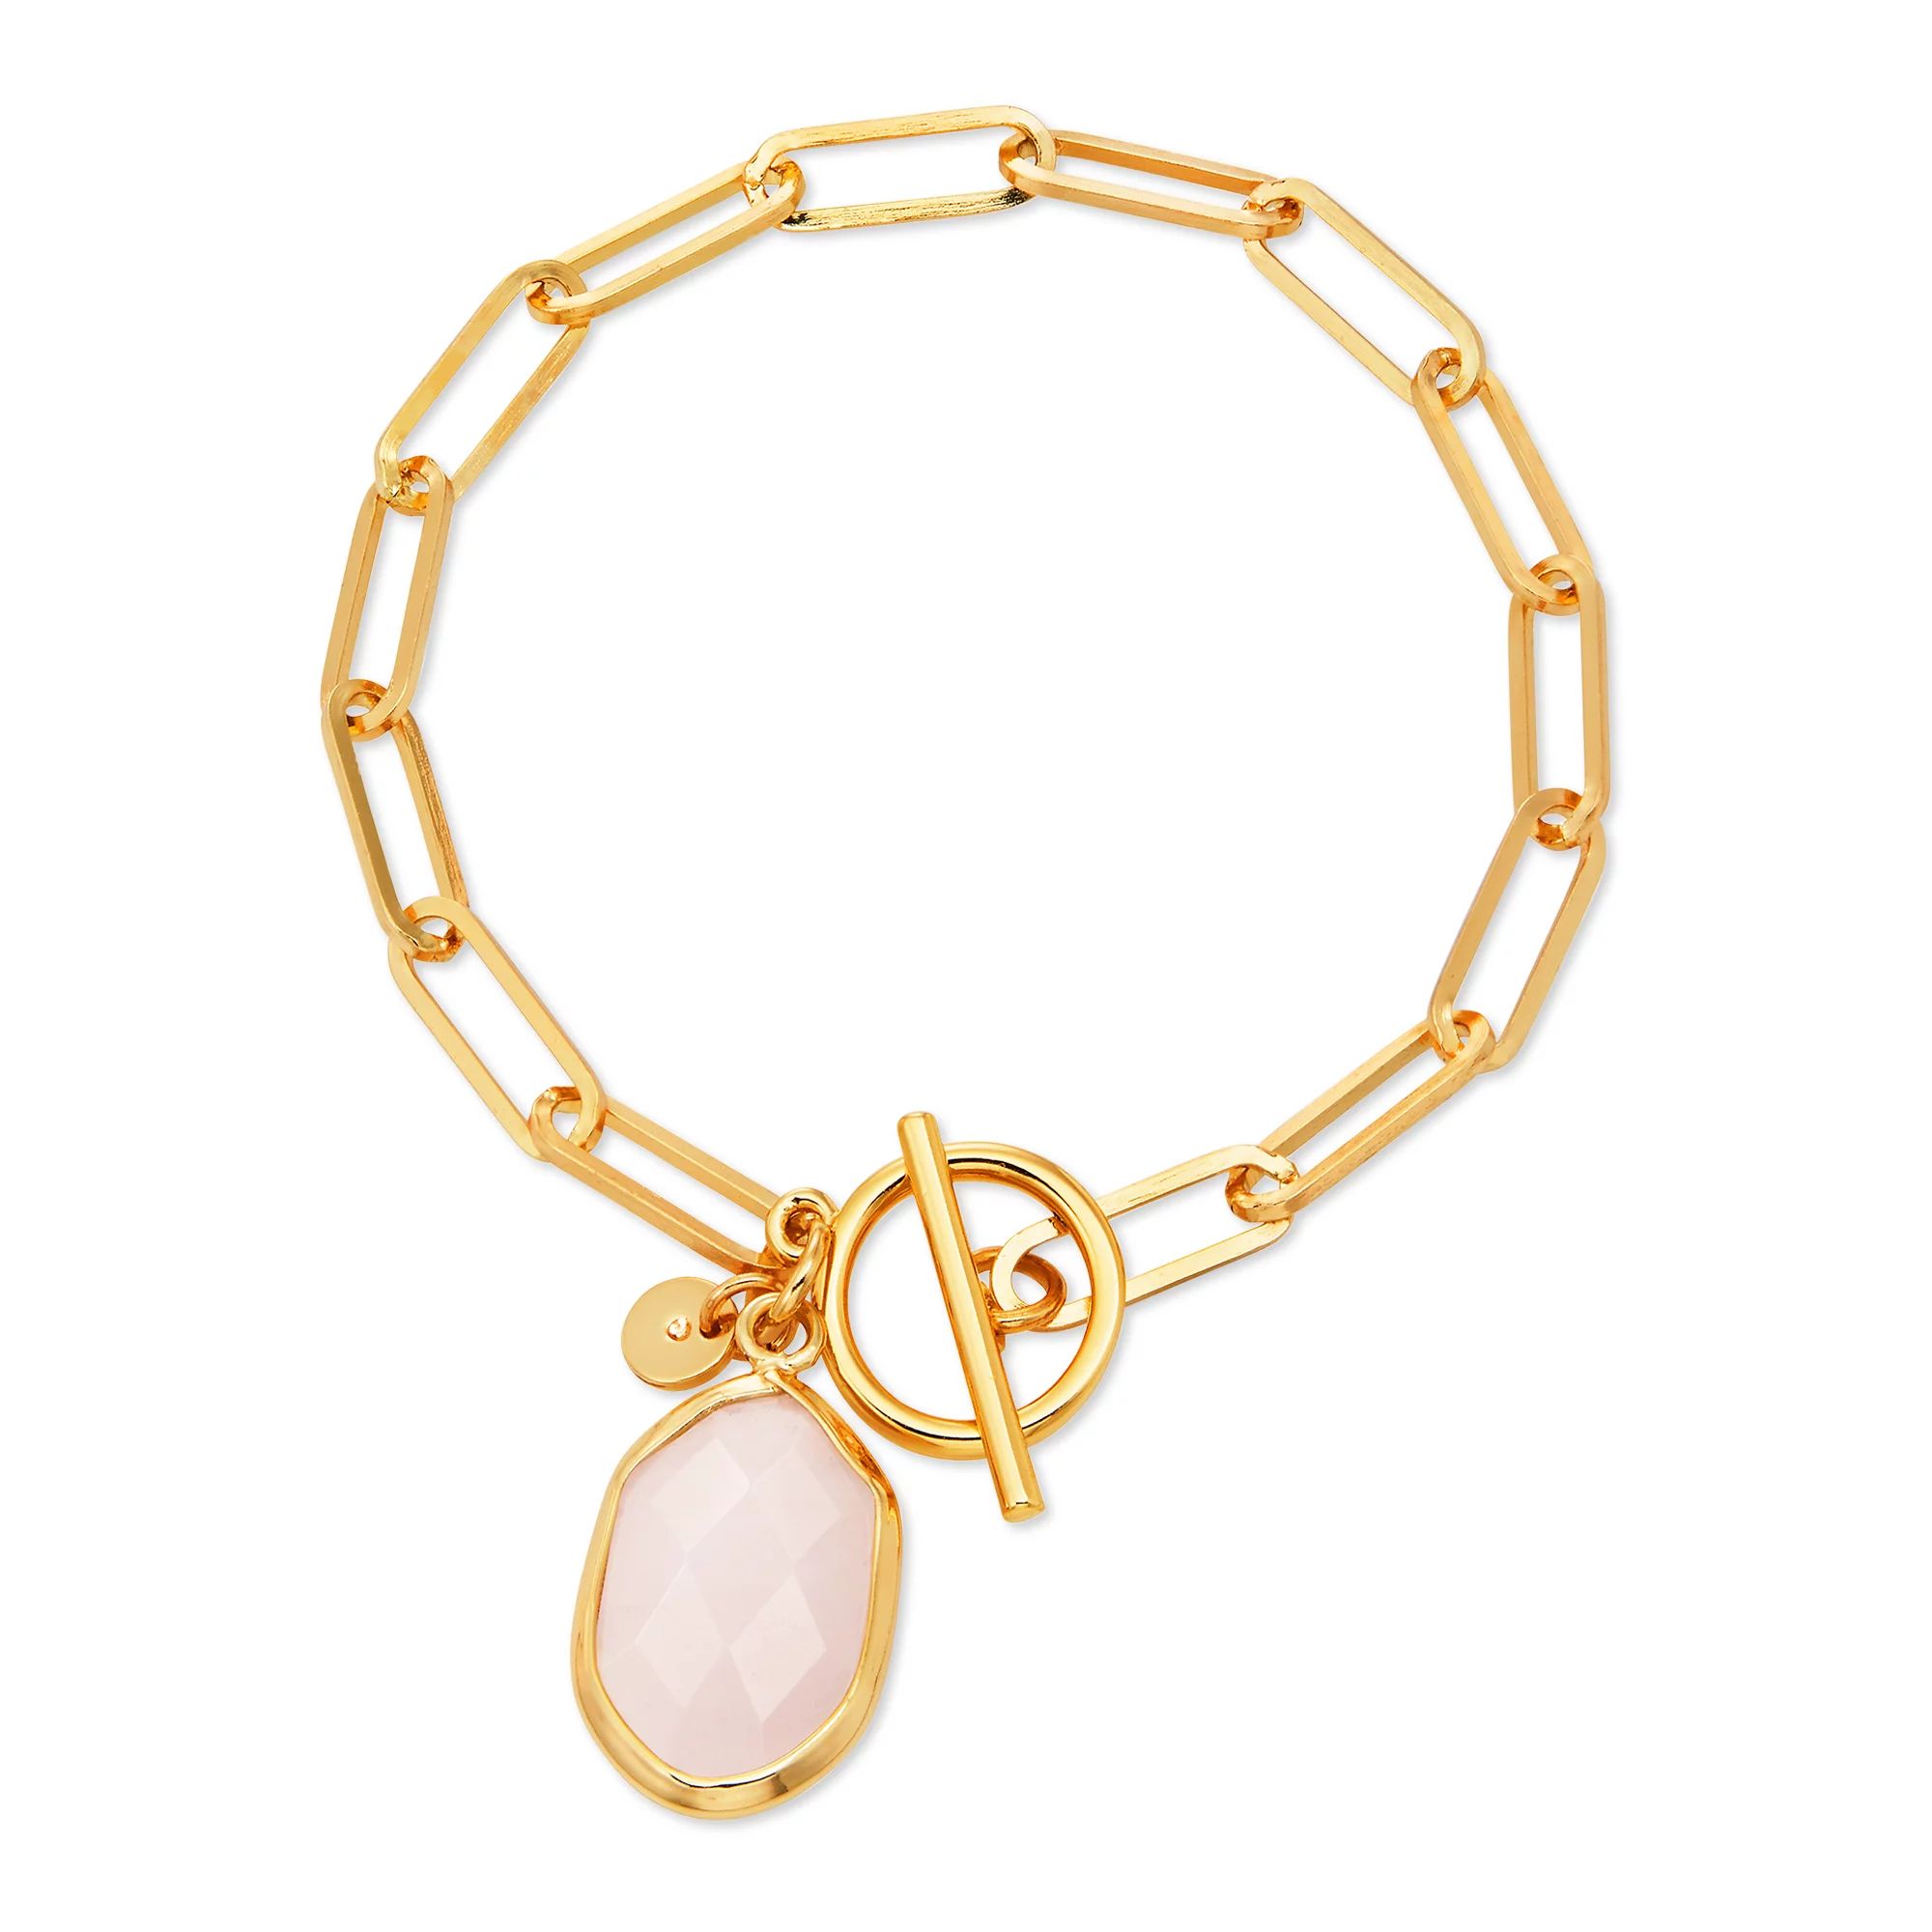 Scoop 14K Gold Flash-Plated Paper Link Chain Toggle Bracelet with Genuine Rose Quartz Stone Charm | Walmart (US)